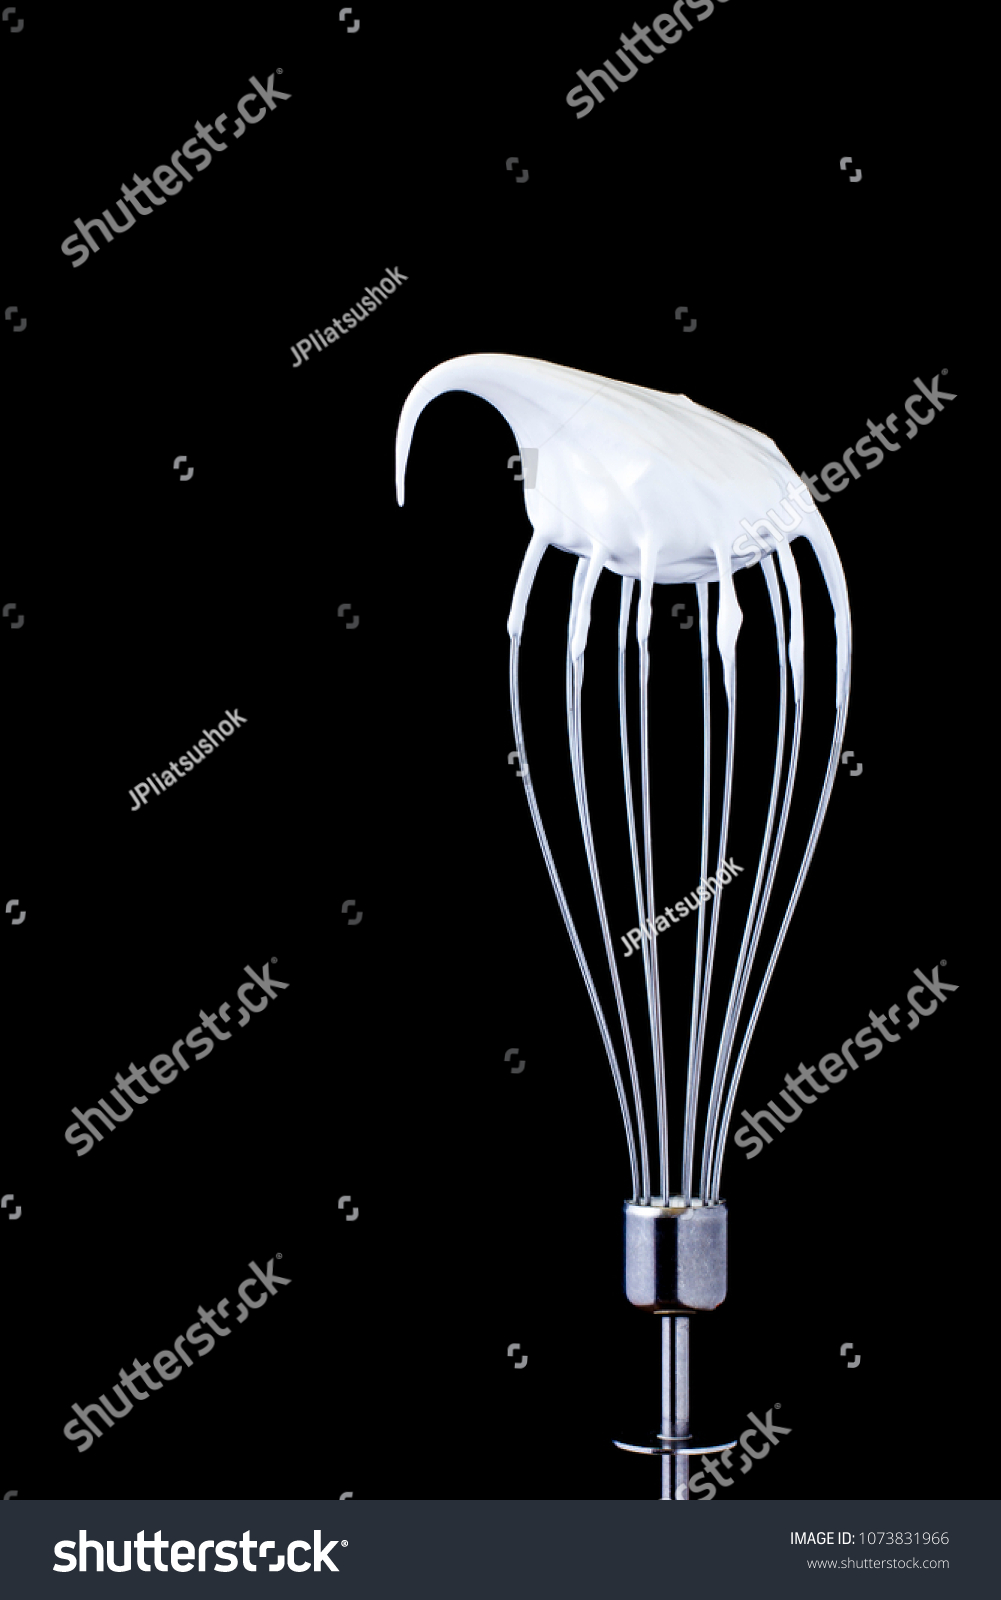 Metal whisk with whipped egg whites on black background #1073831966